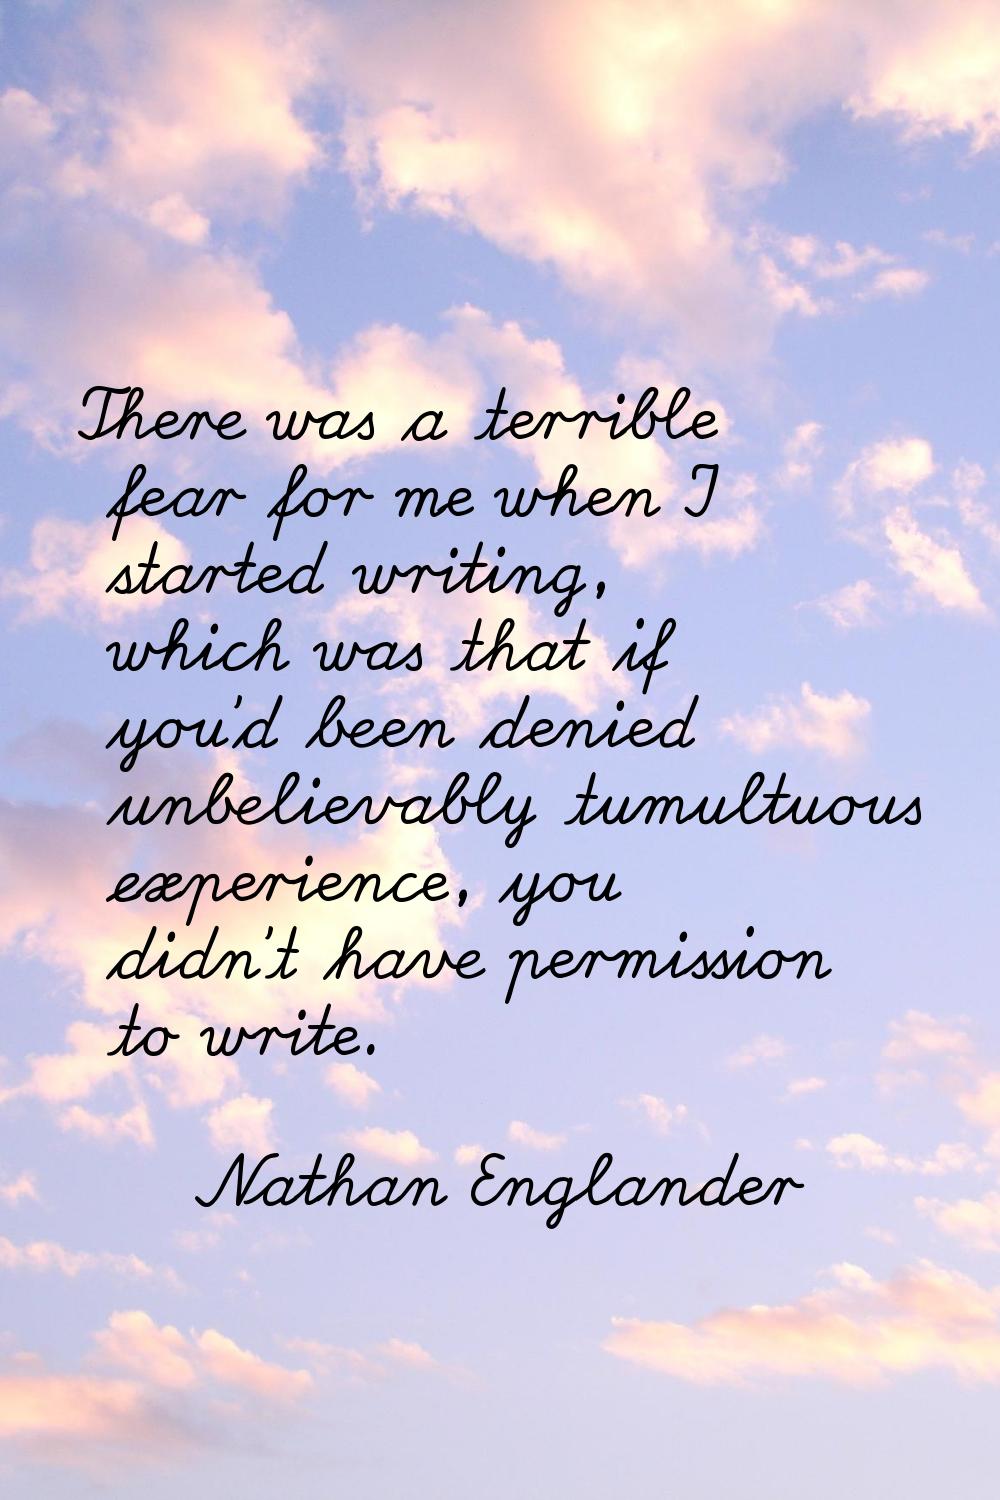 There was a terrible fear for me when I started writing, which was that if you'd been denied unbeli